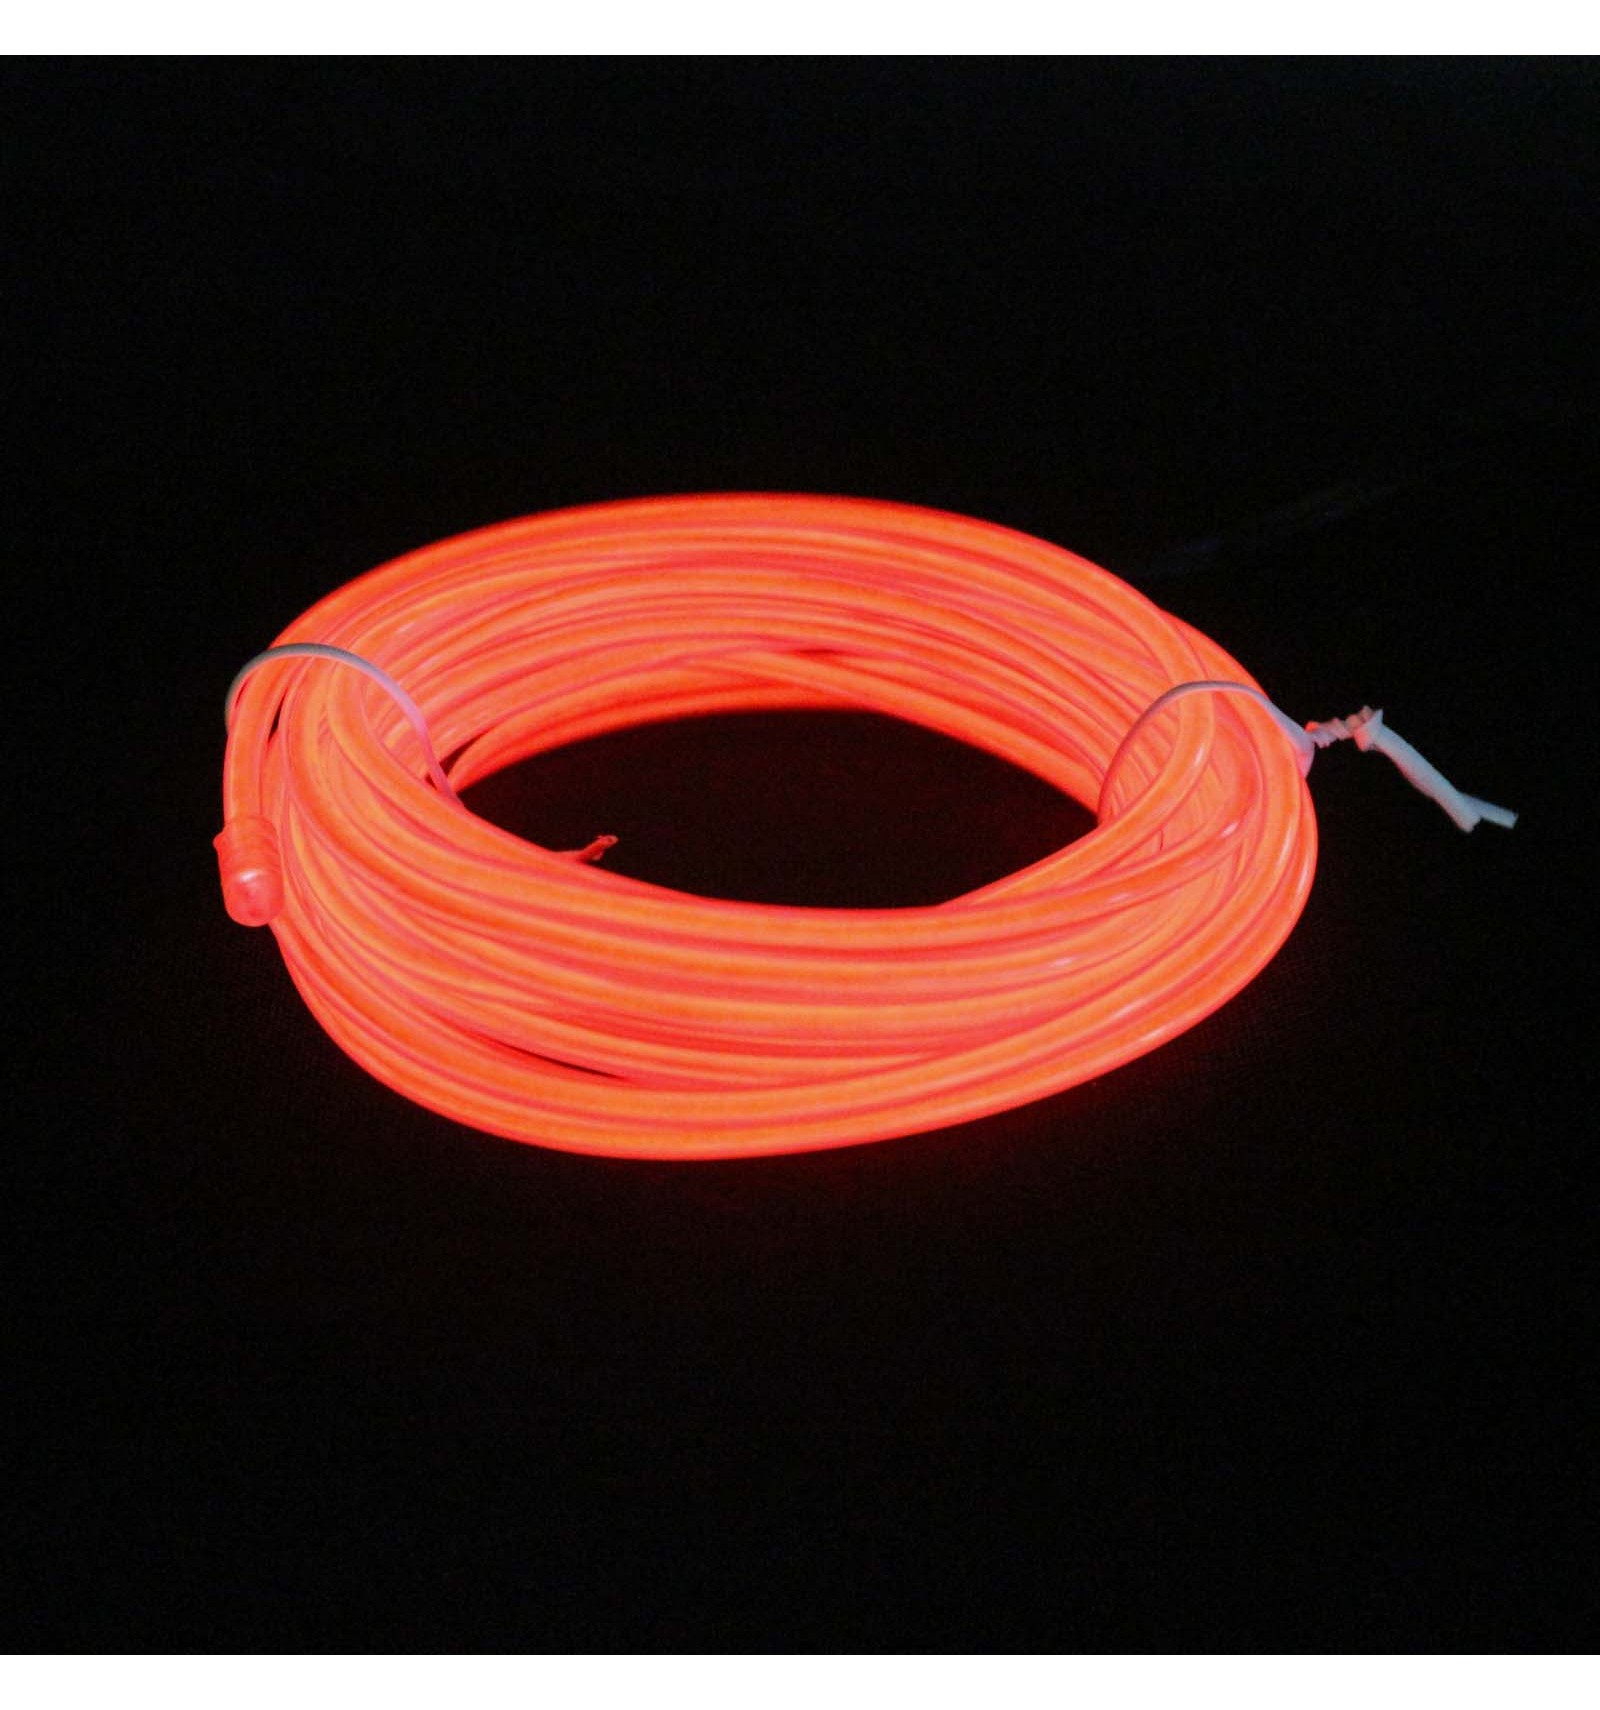 Electroluminescent Wire  3m Lengths of Red EL Wire